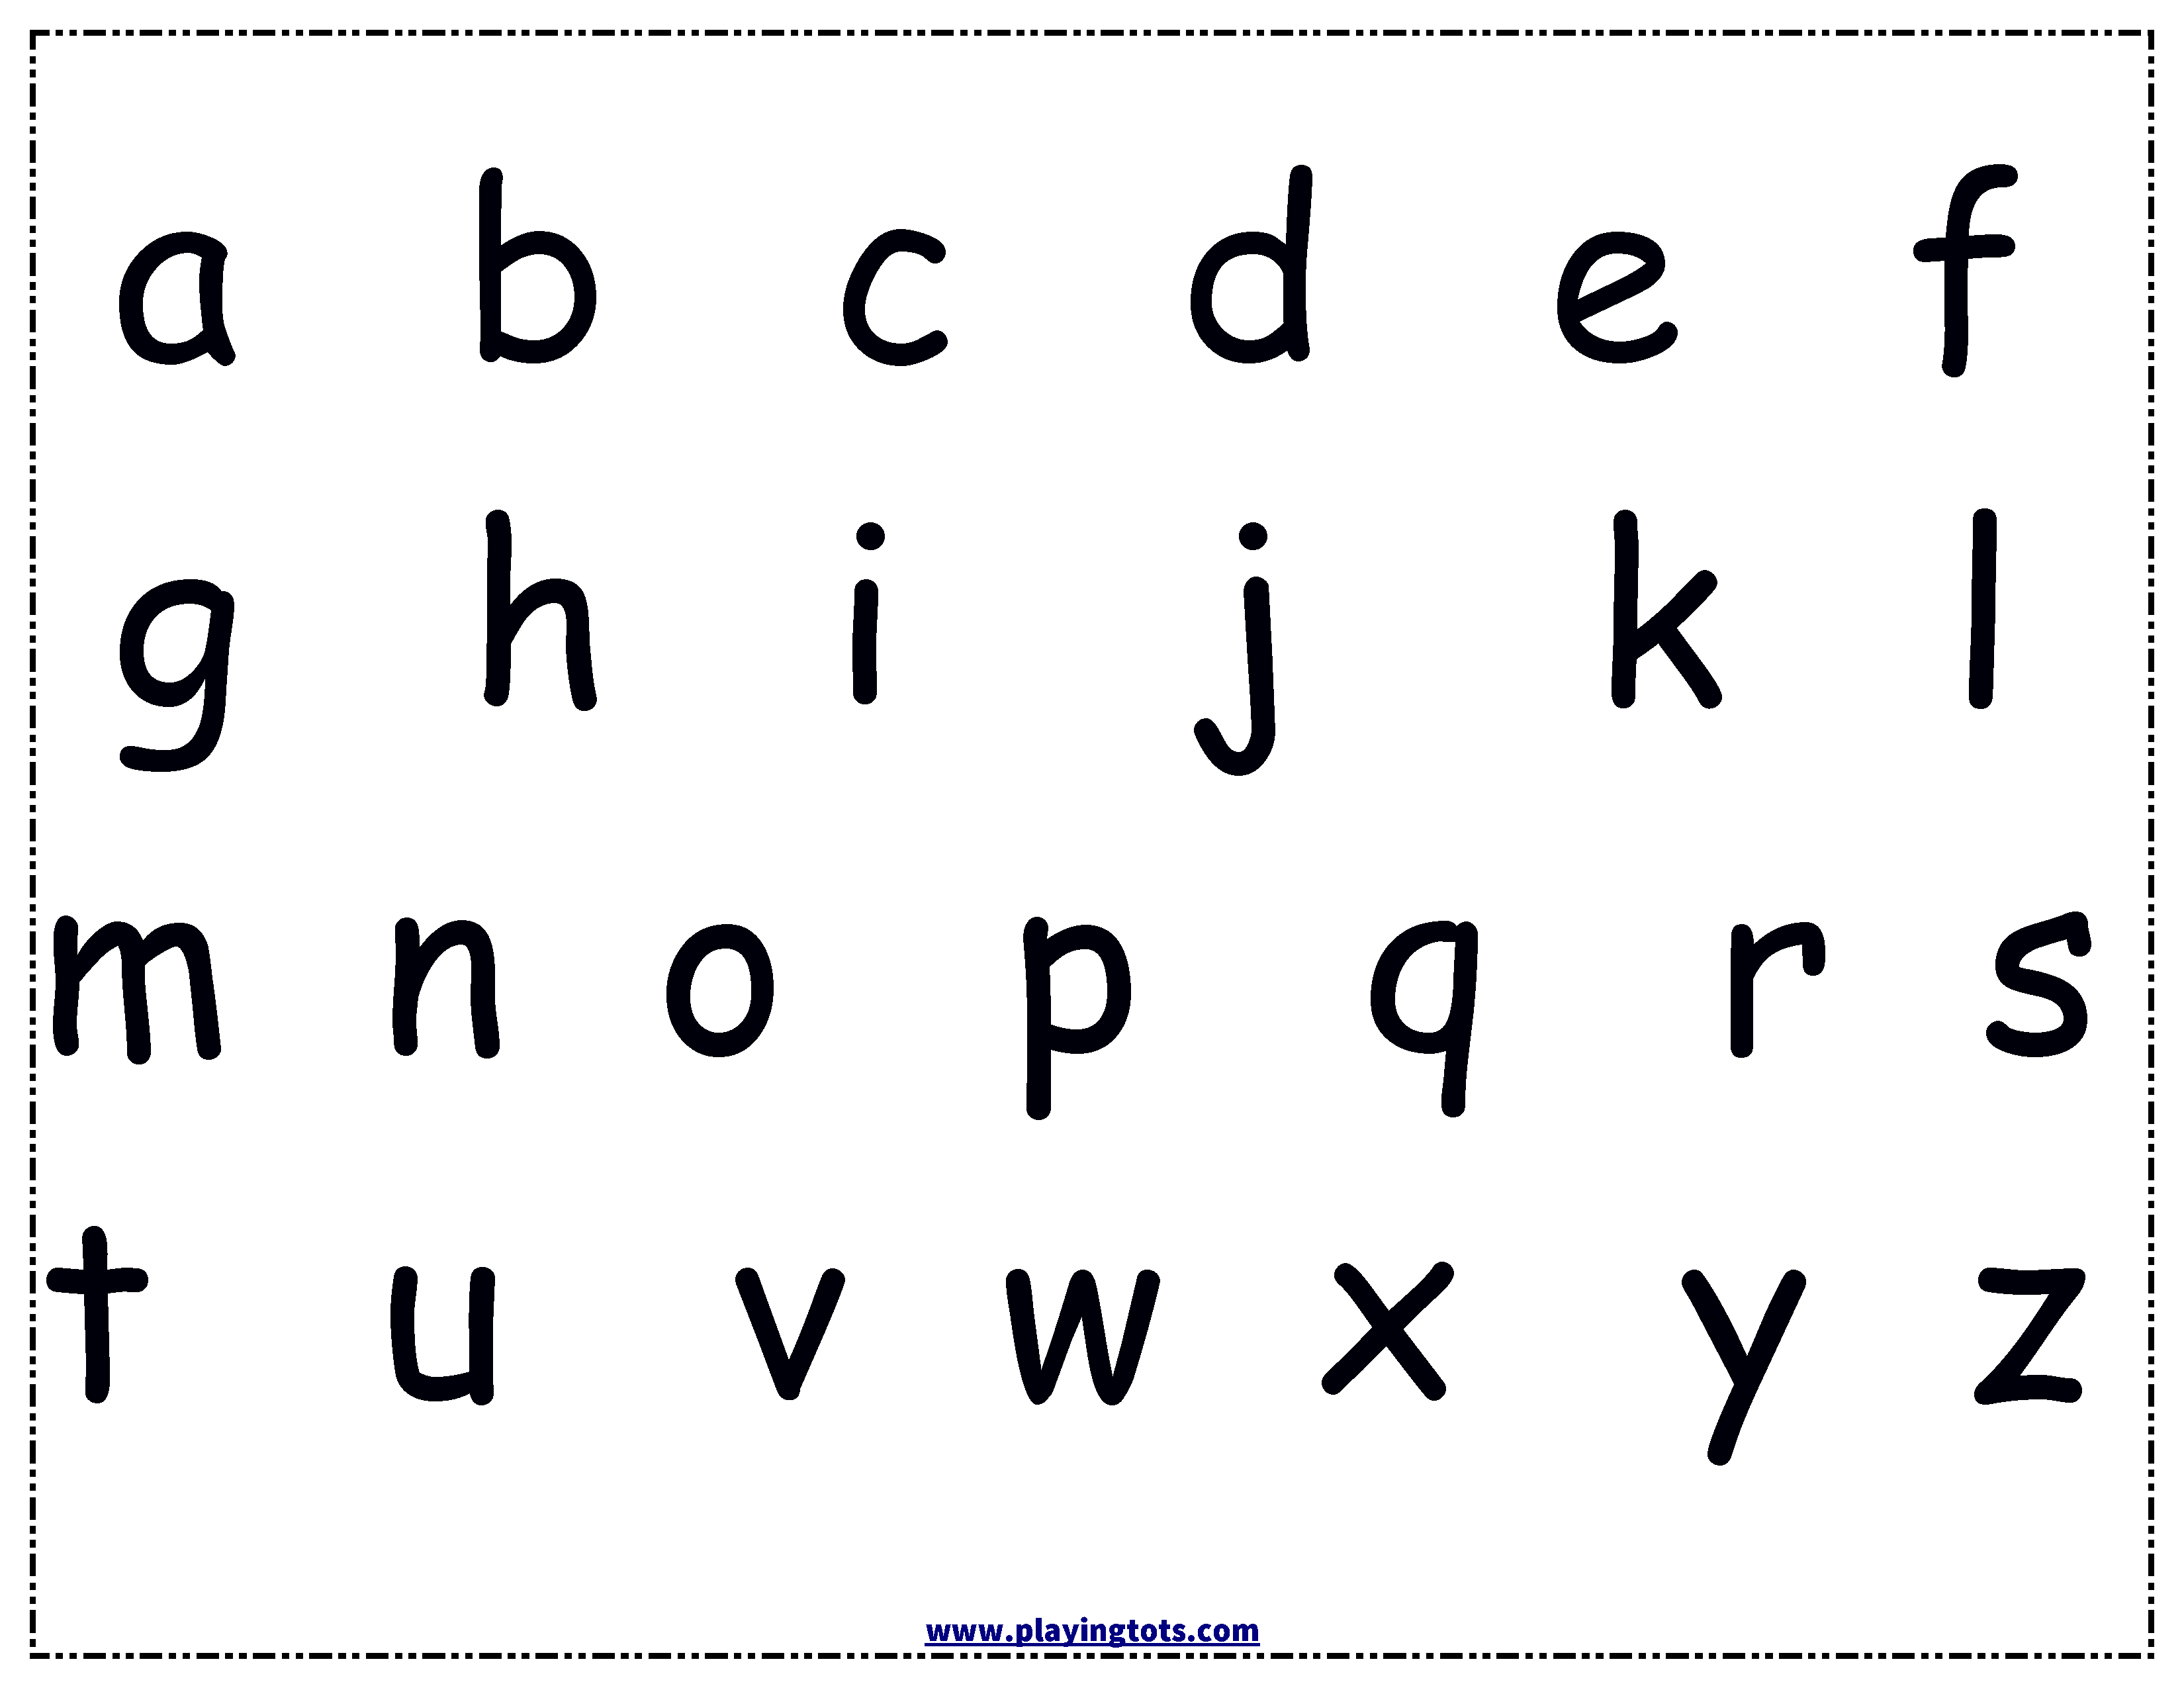 free-alphabet-charts-charts-include-both-upper-and-lower-case-letters